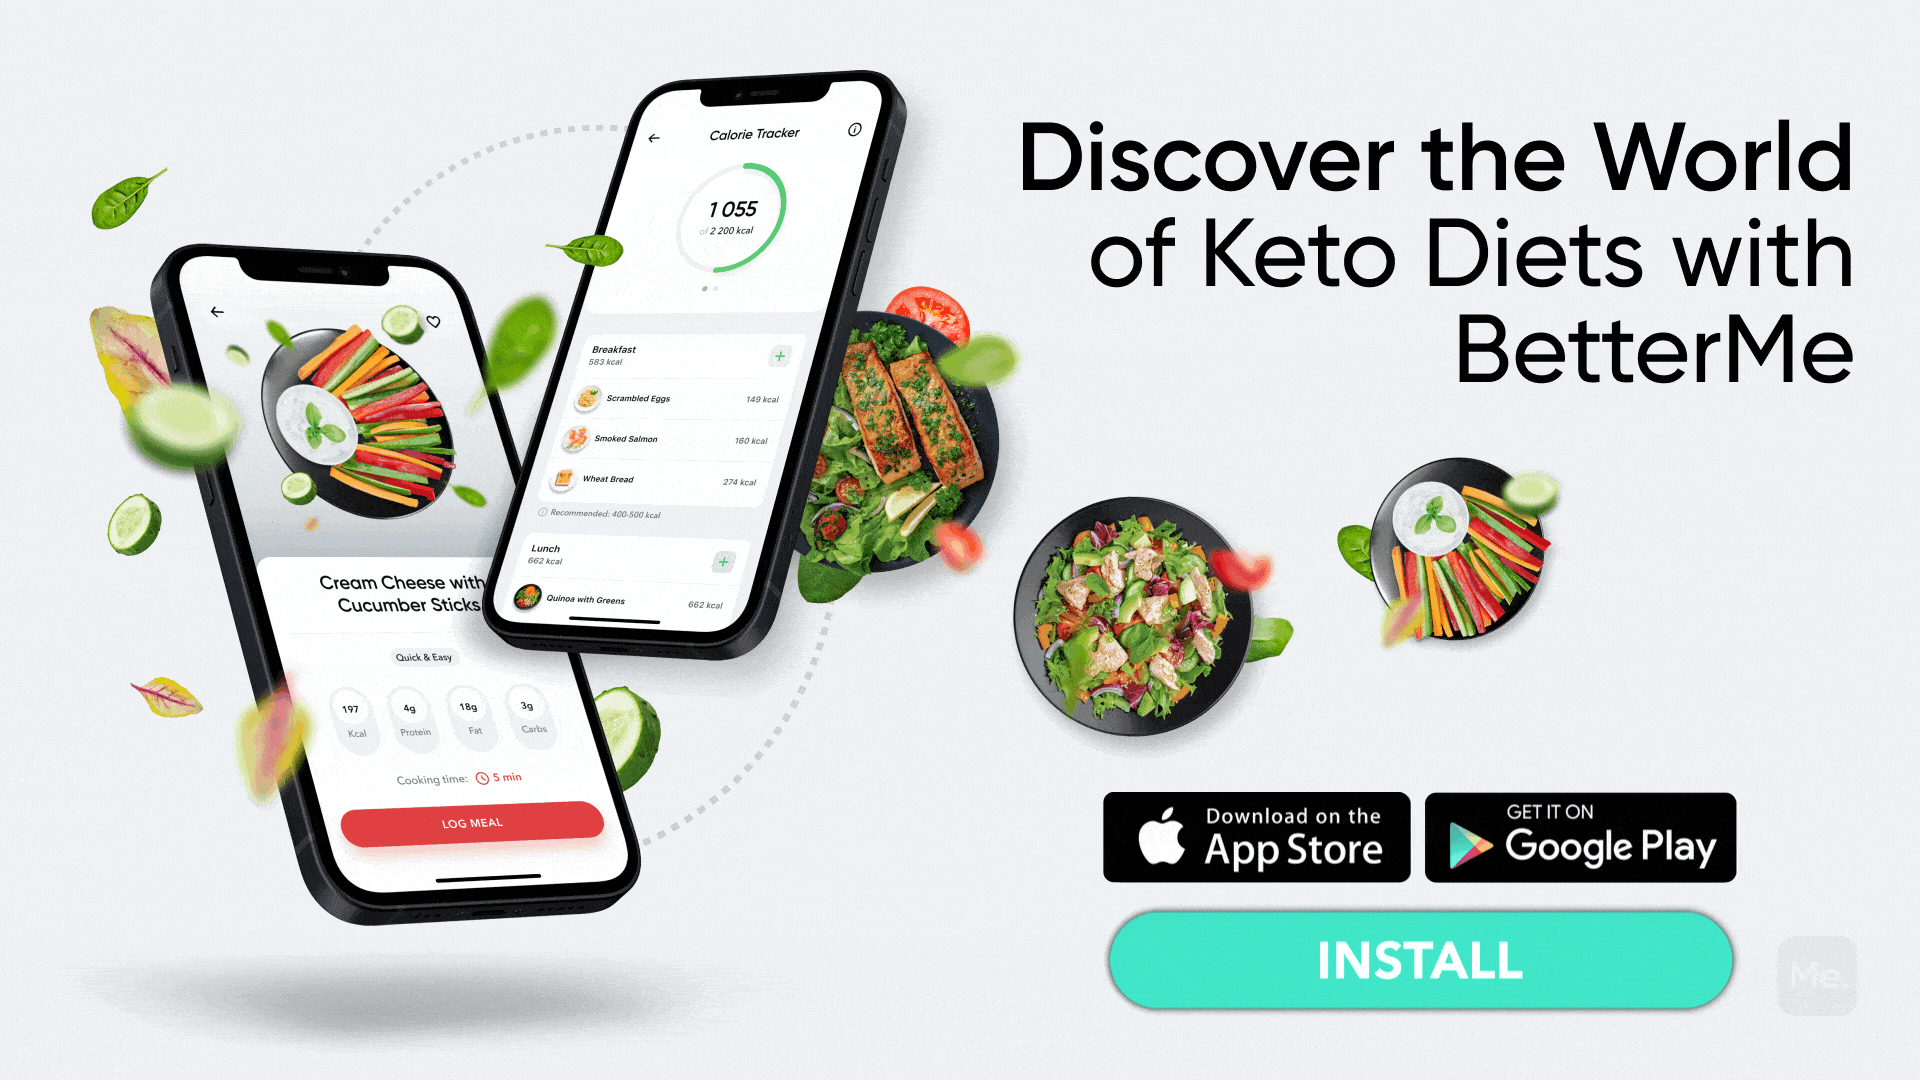 Discover the World of Keto Diets with BetterMe